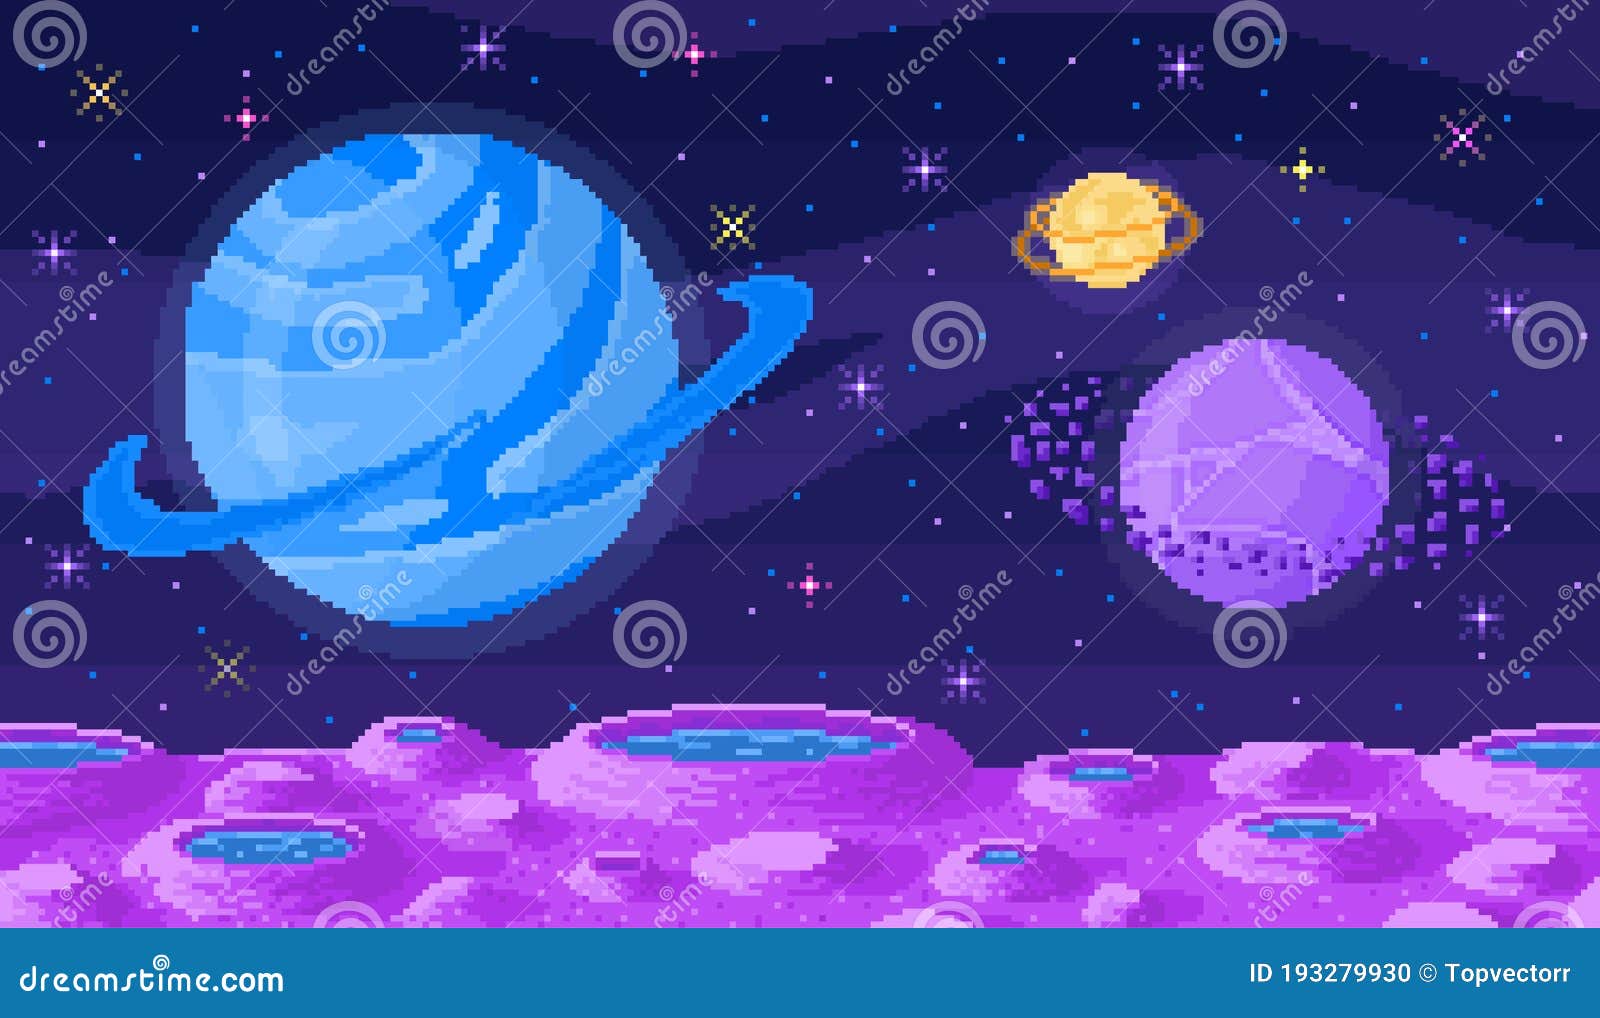 Space Planet In Pixel Art Pixelated Landscape For Game Or Application 8 Bit Video Game Stock Vector Illustration Of Cartoon Pixelated